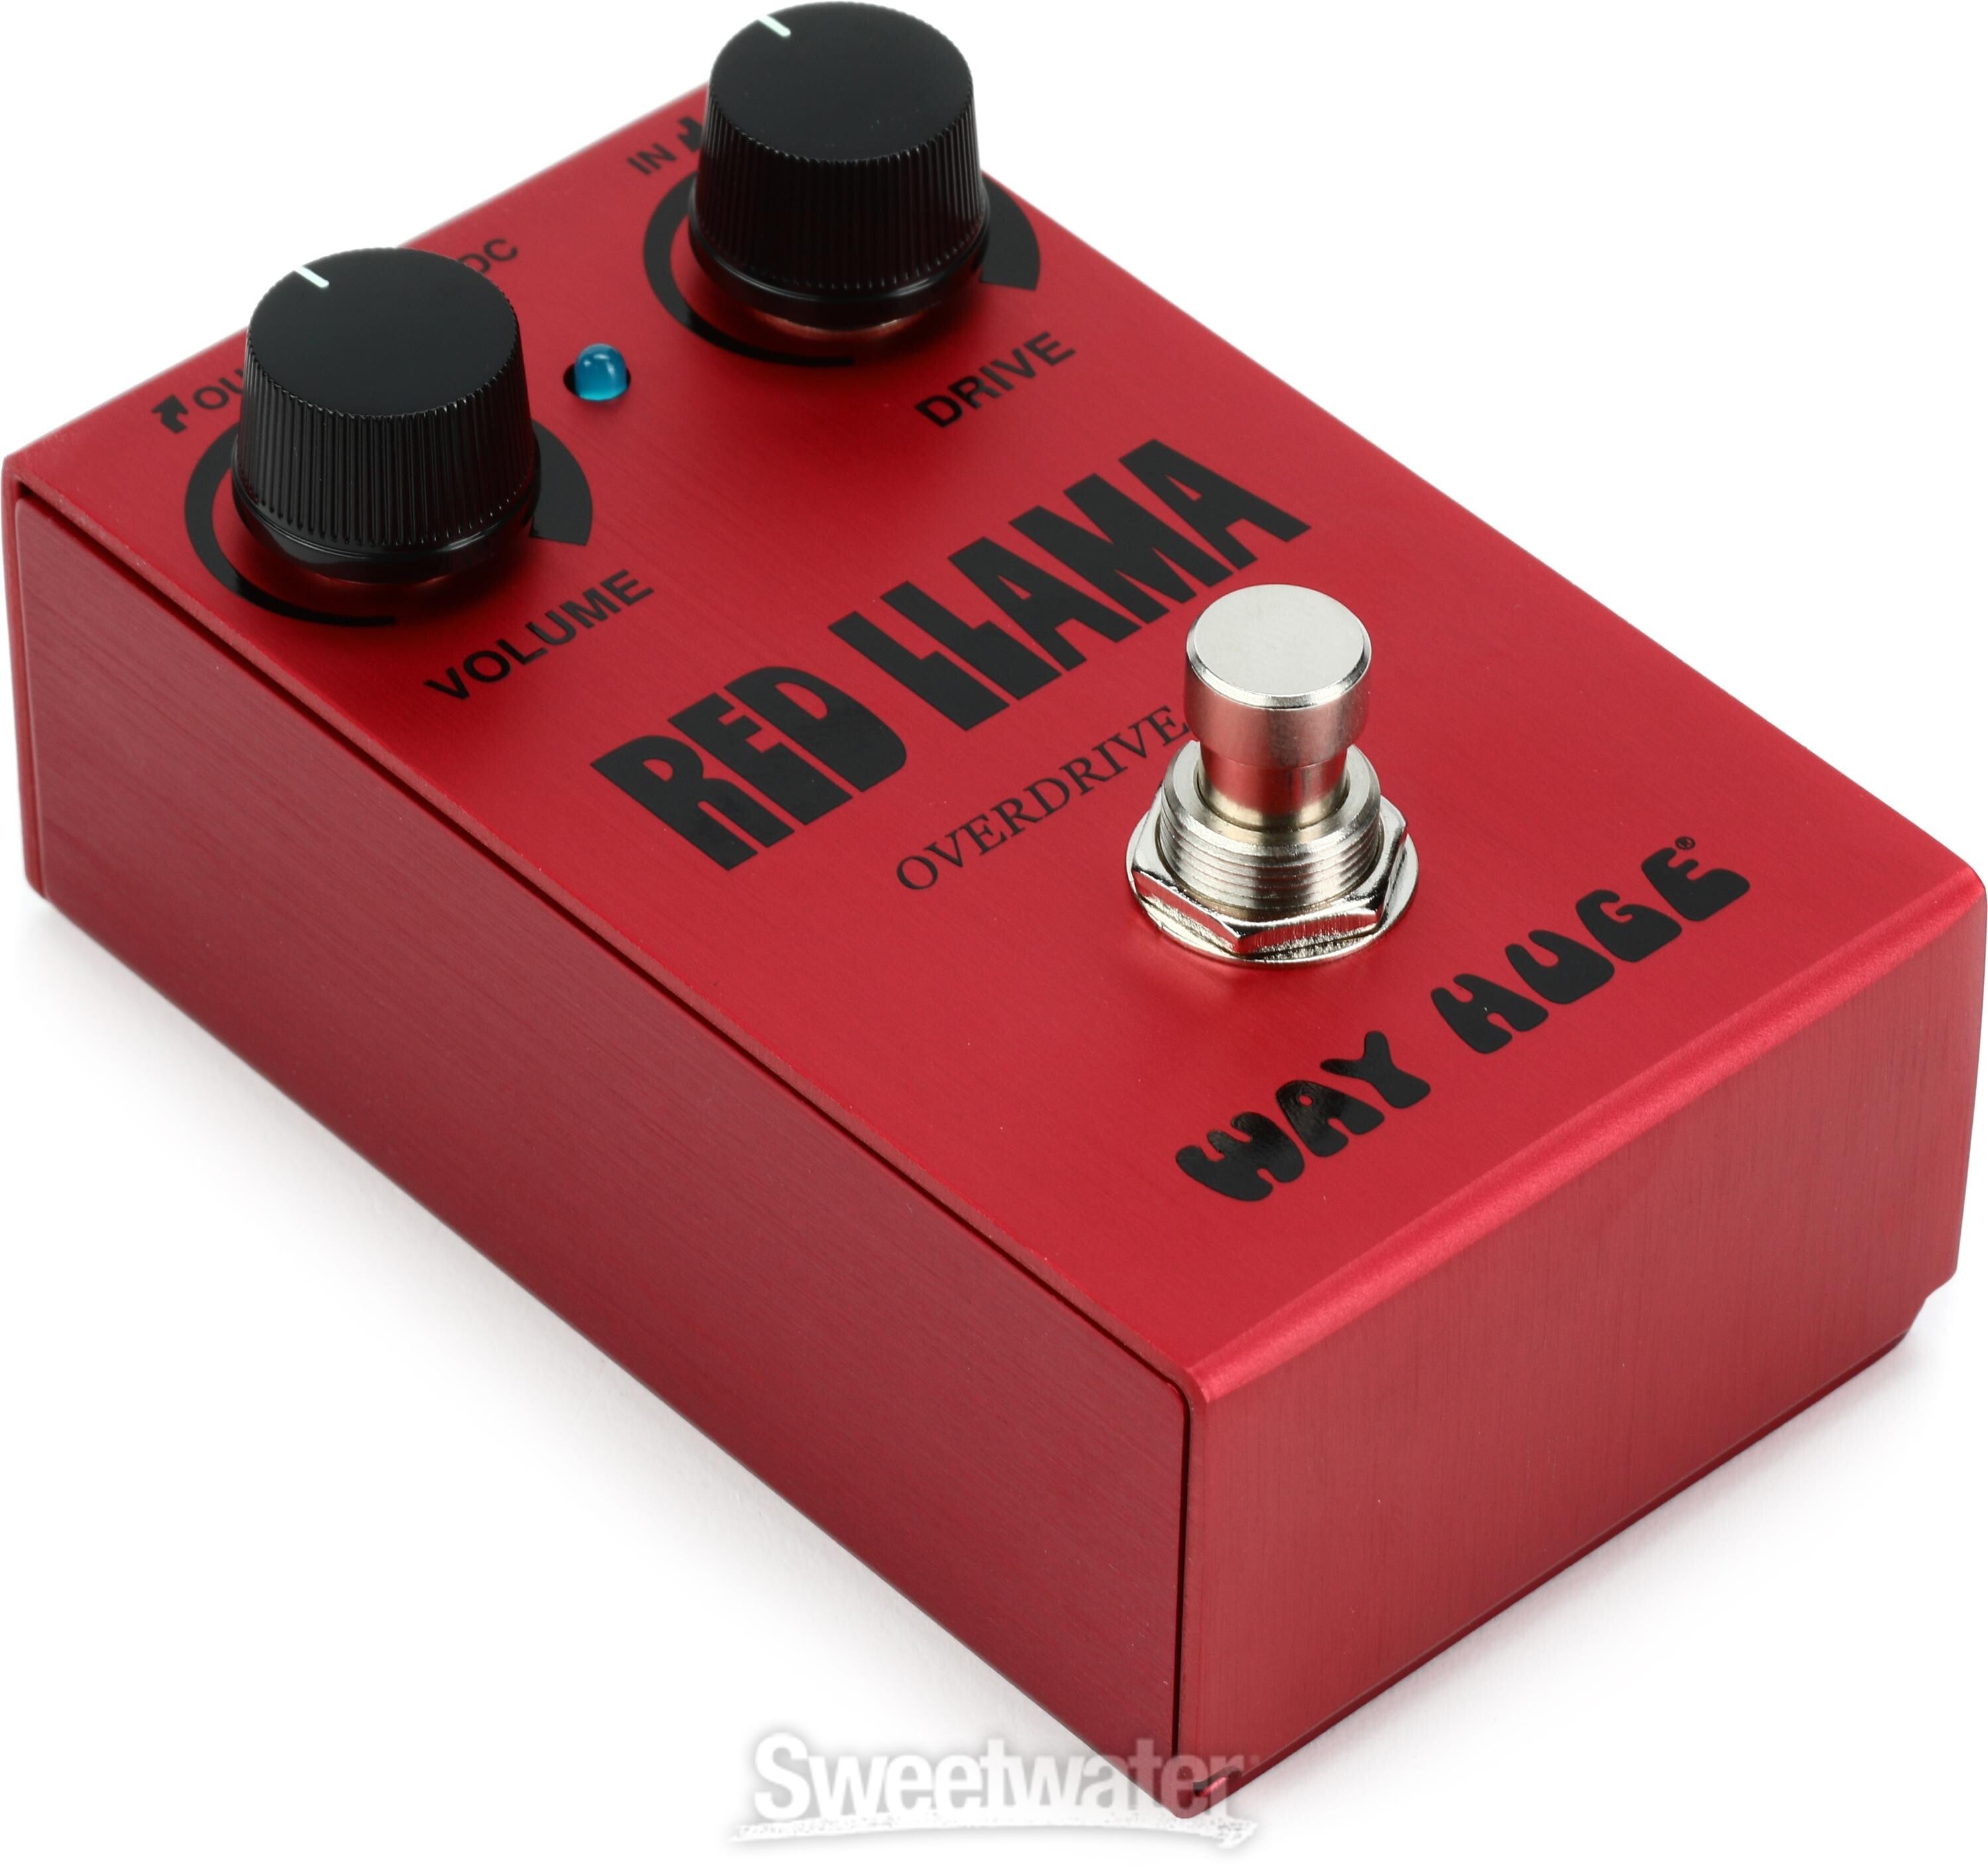 Way Huge Red Llama Overdrive MkIII Smalls Pedal | Sweetwater